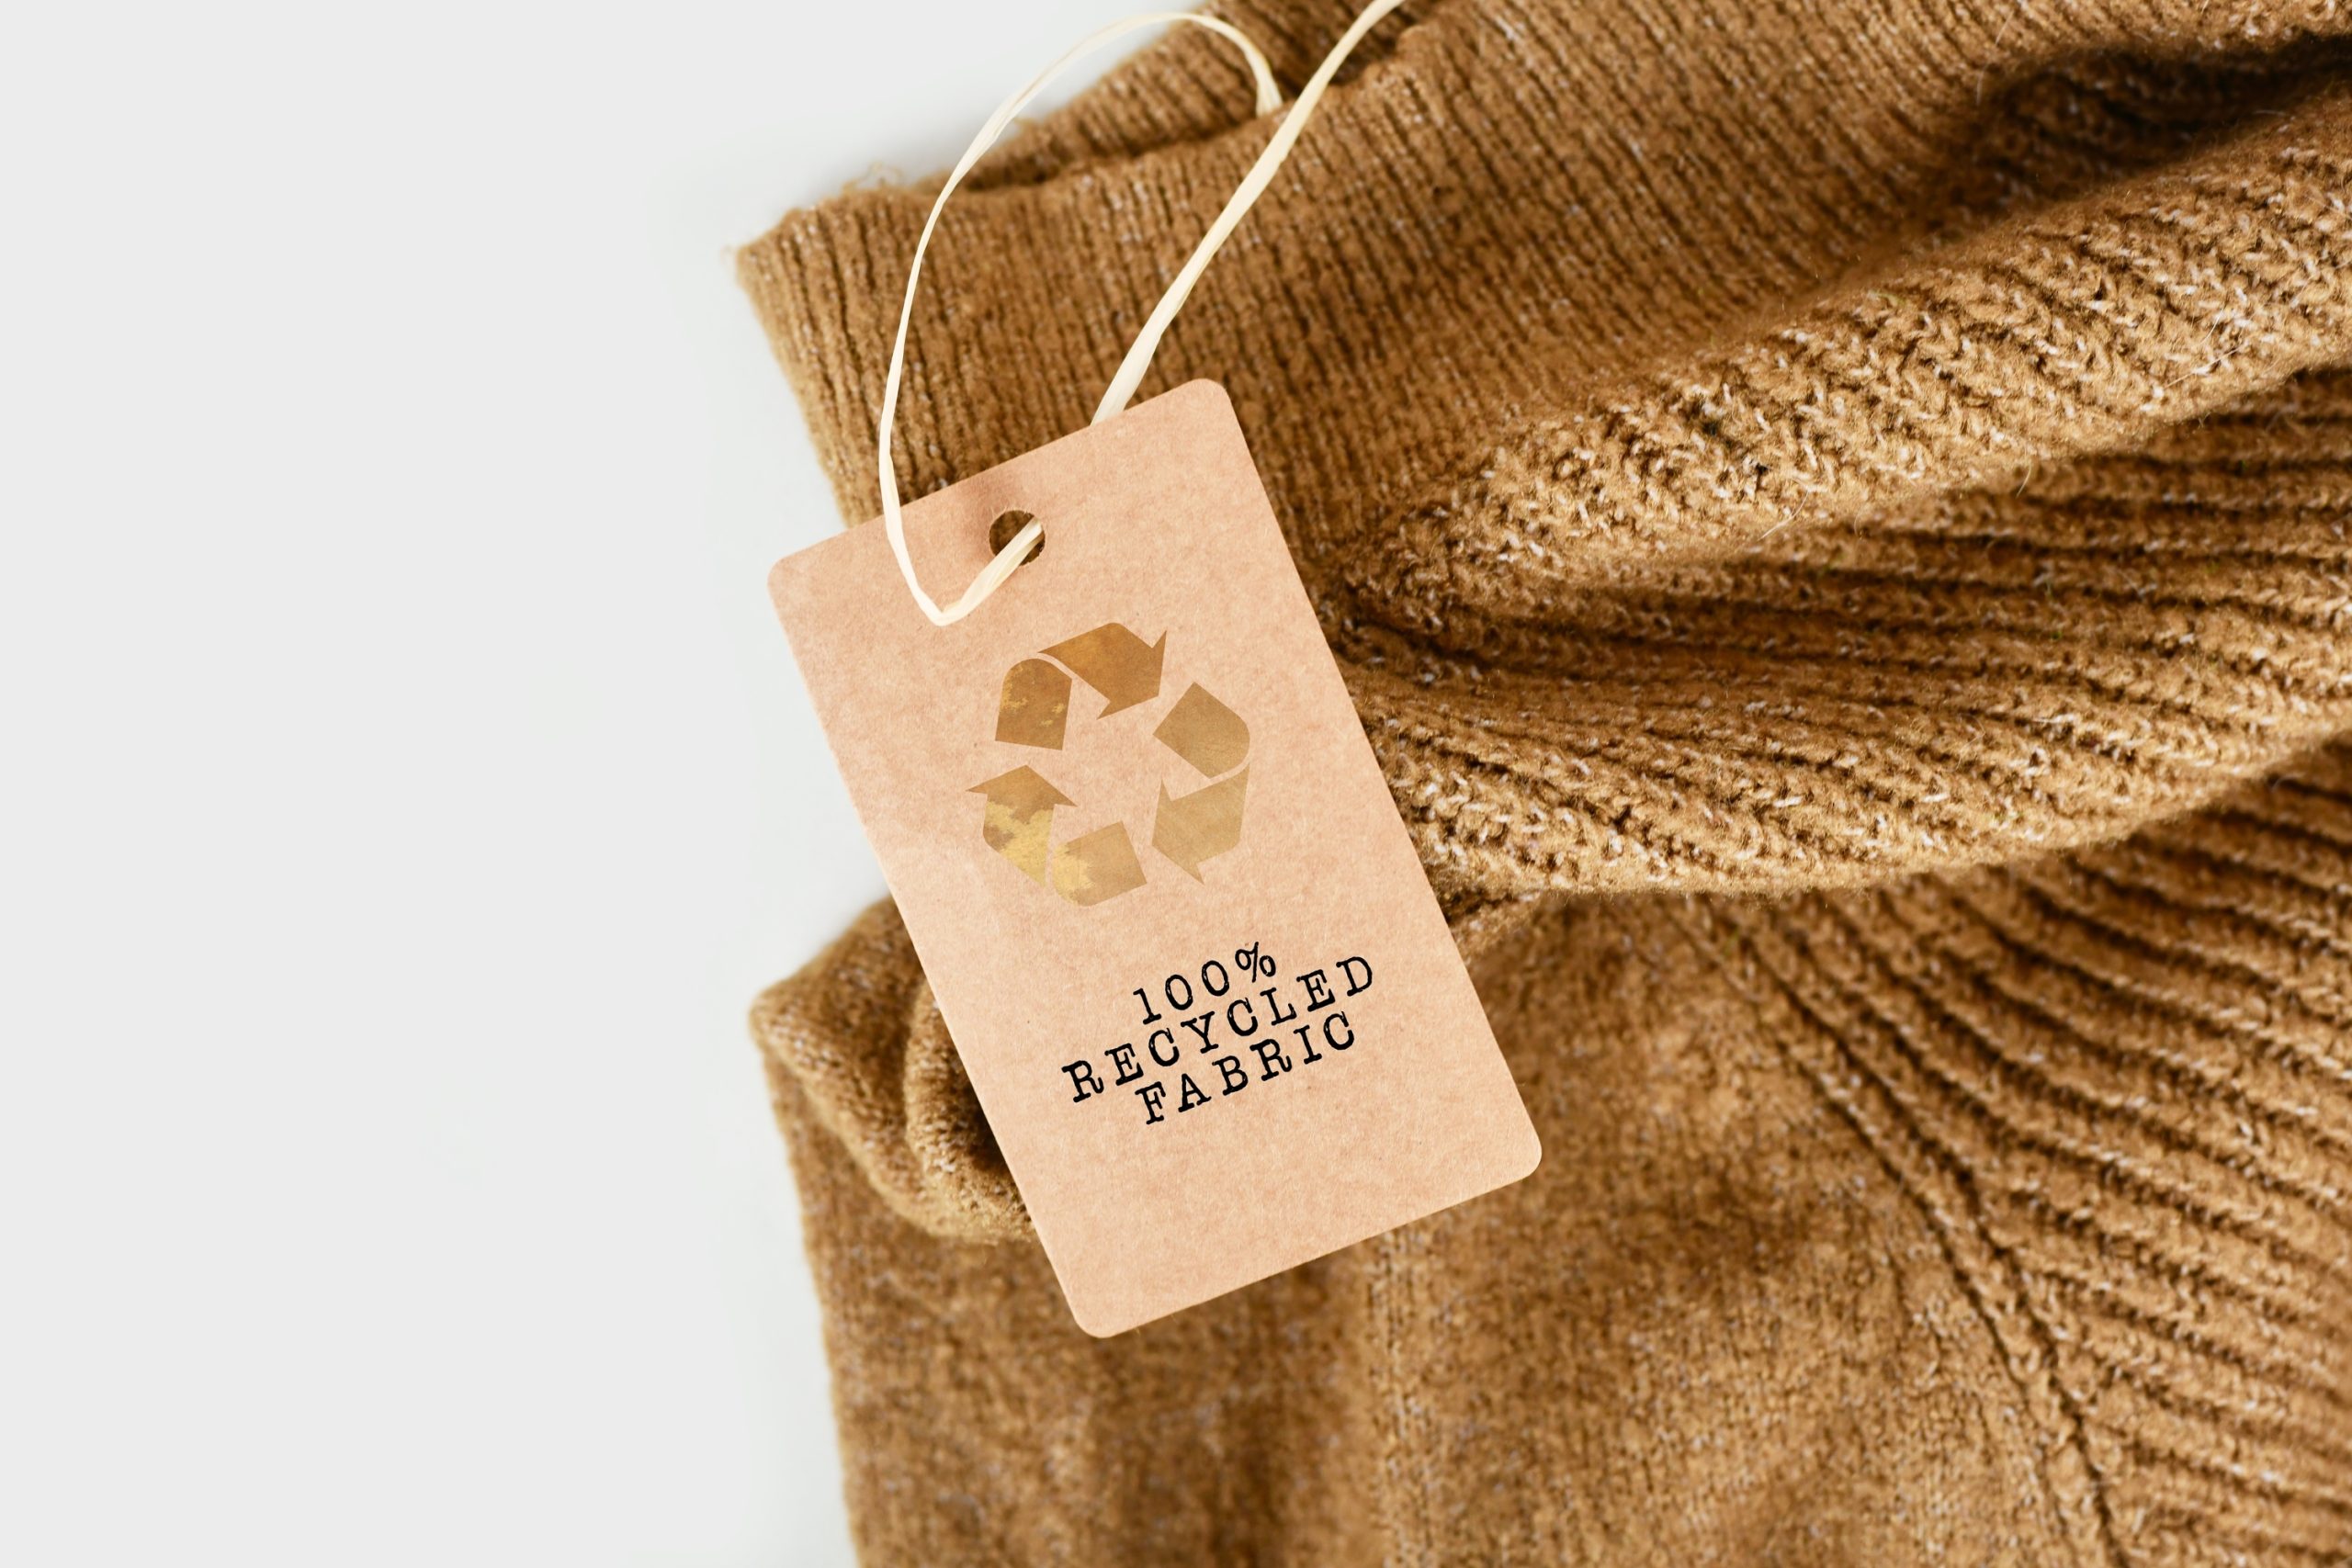 Recycled fibres: The machinery and services